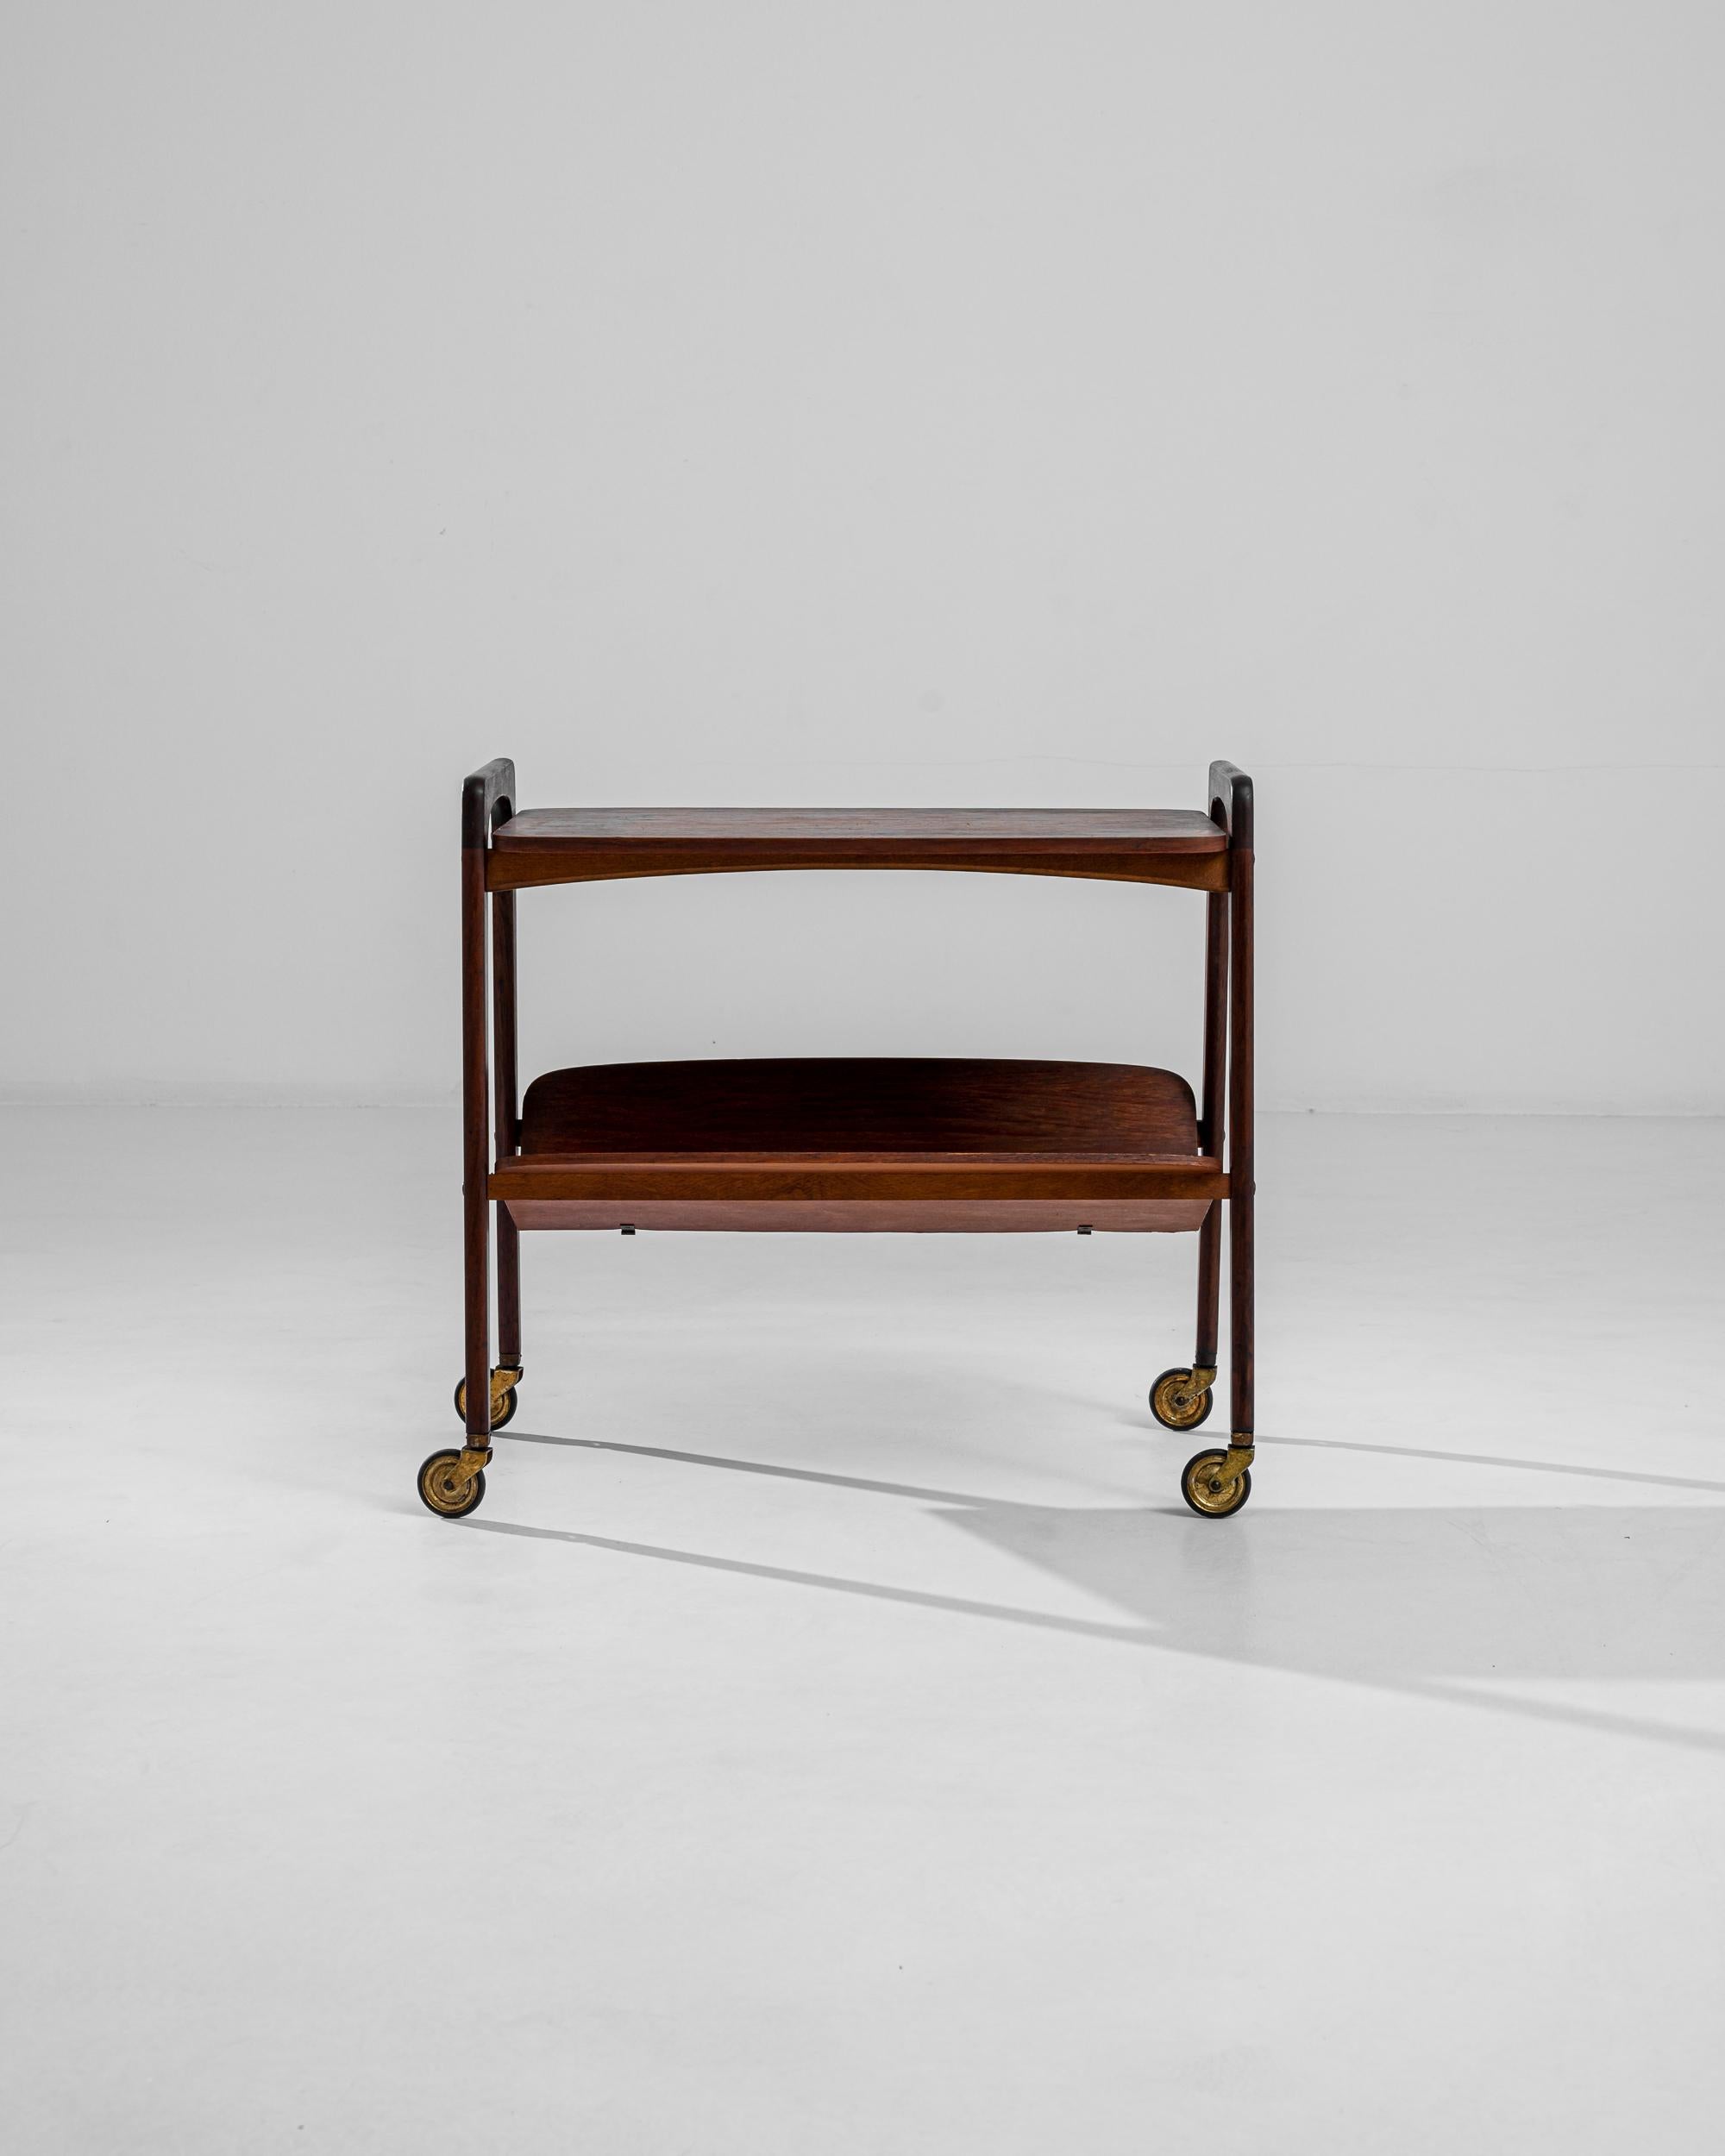 Discover the epitome of mid-century craftsmanship with this exquisite 1960s Danish Teak Bar Cart, a testament to timeless elegance and functional design. The rich, warm hues of teak wood evoke a sense of classic sophistication, beautifully